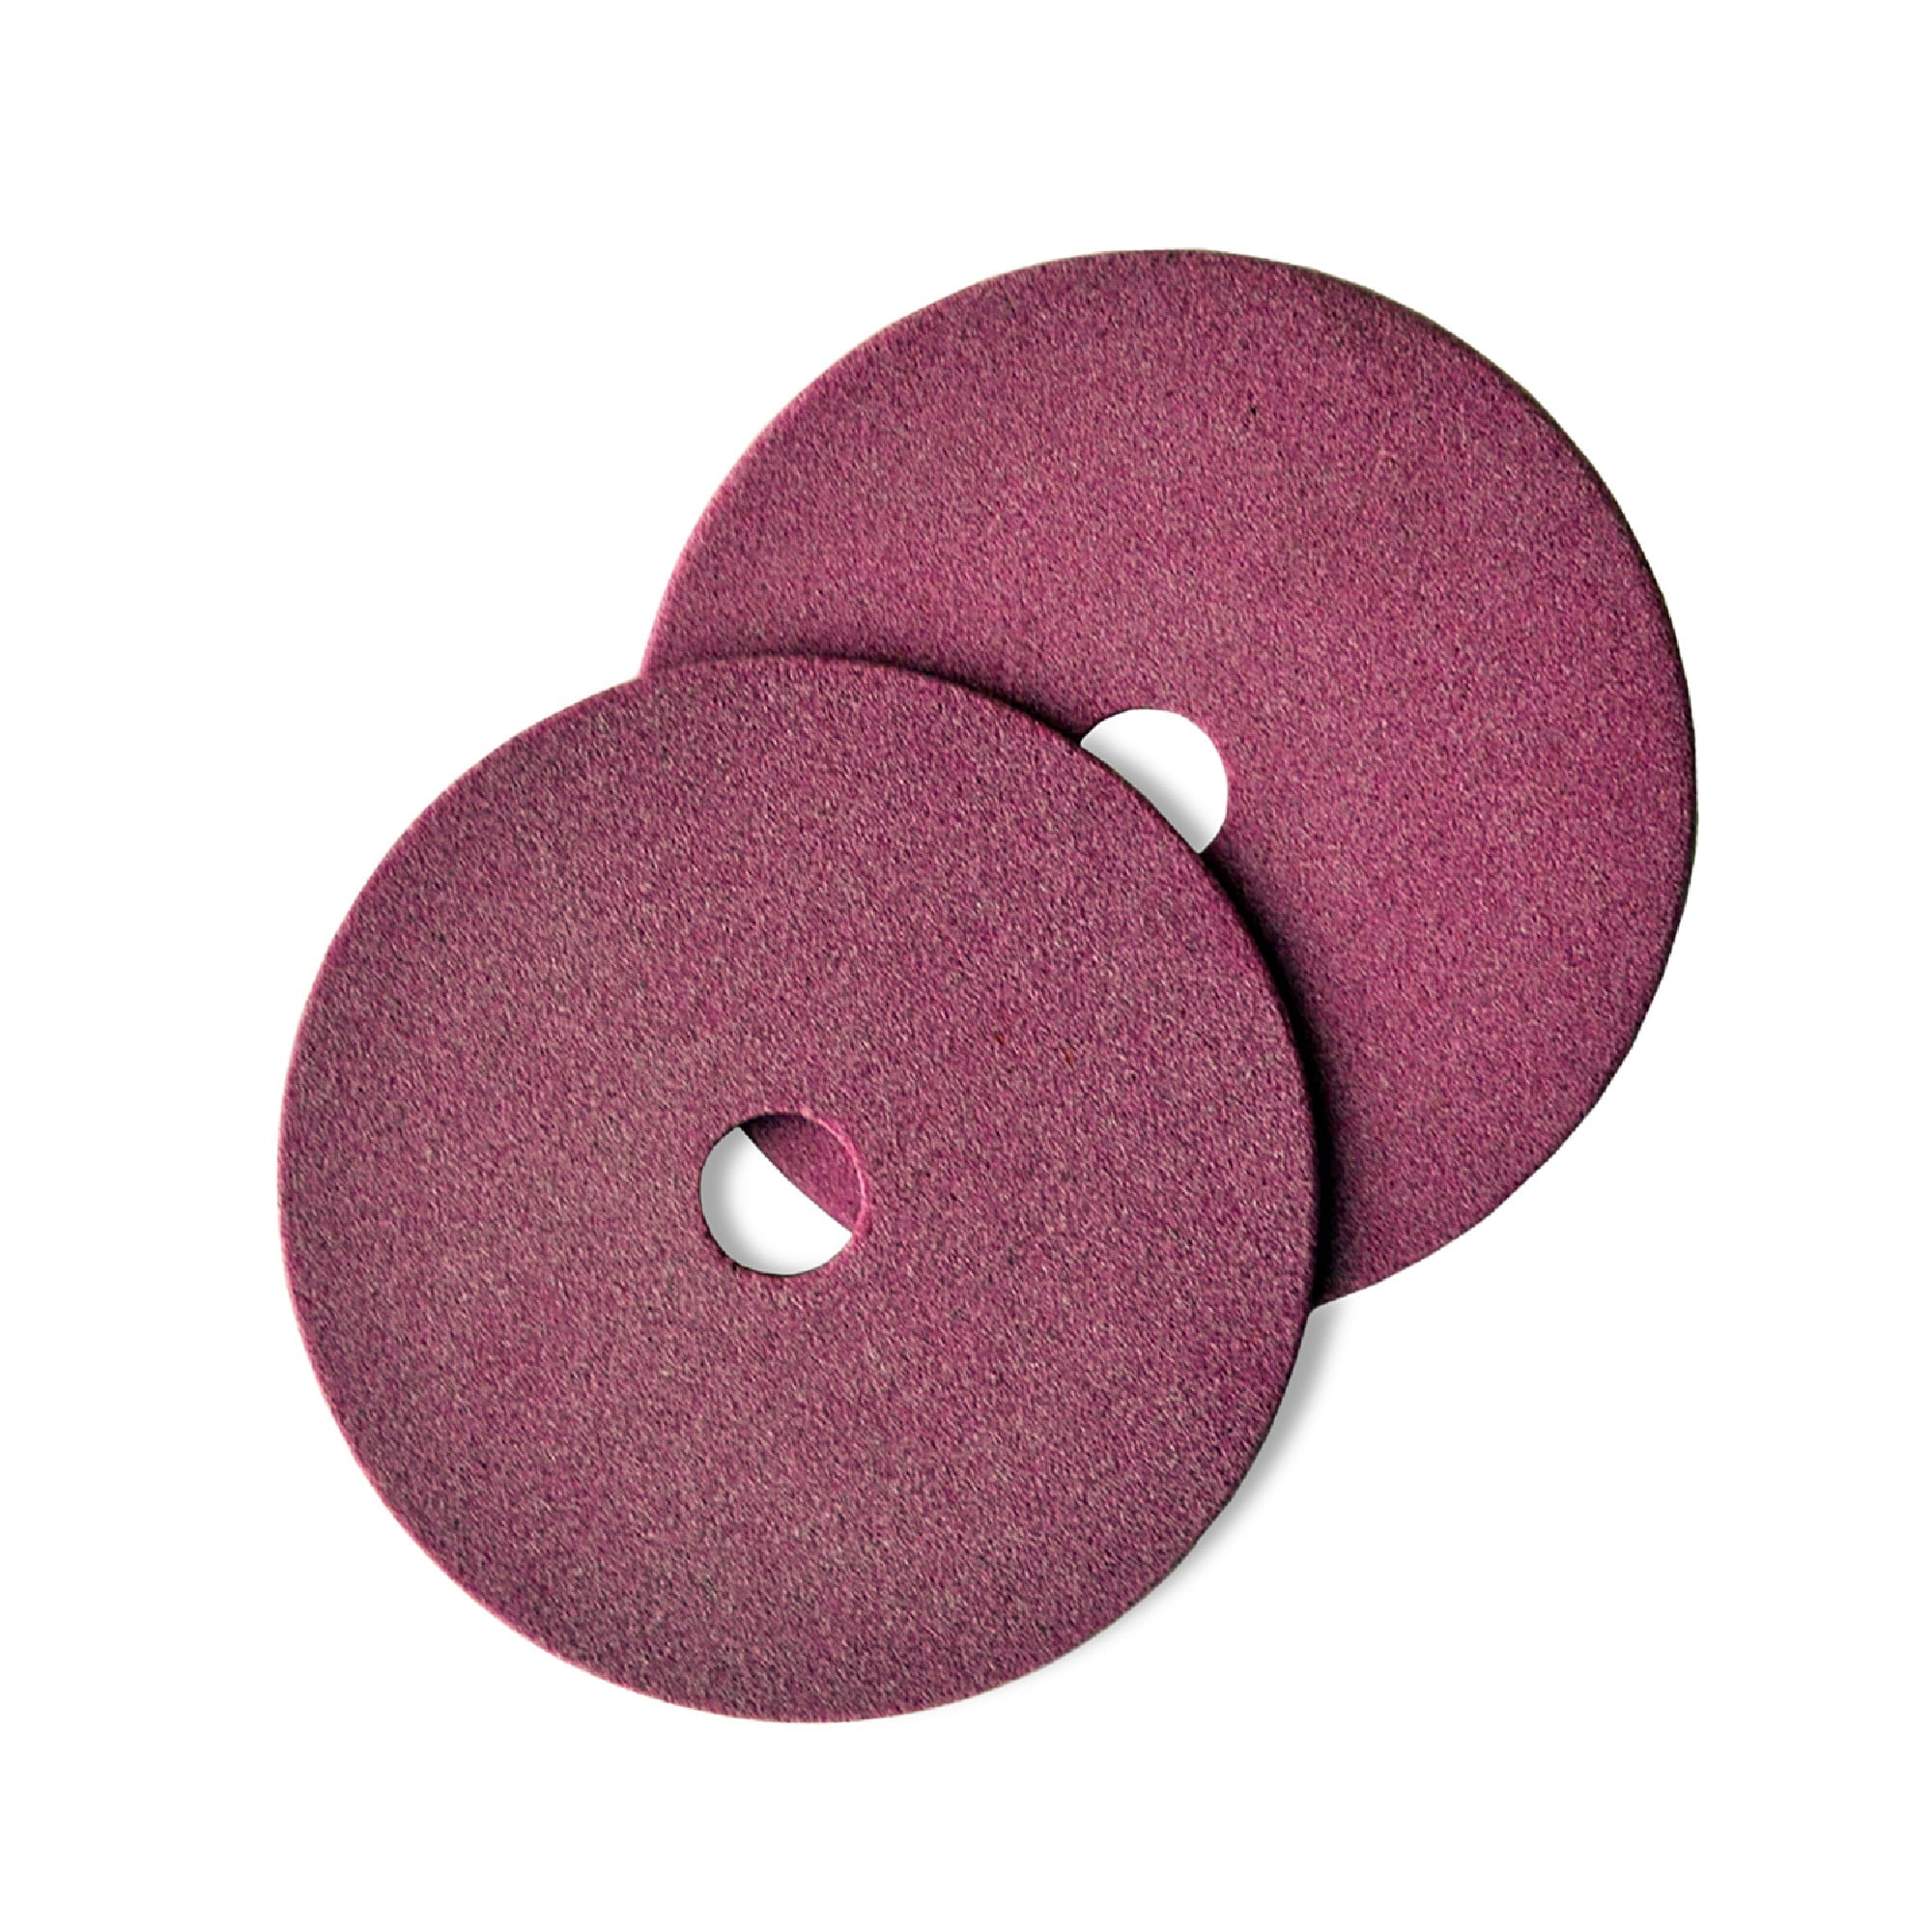 Electric chainsaw sharpener grinding wheel discs 100mm & 145mm pink or diamond 